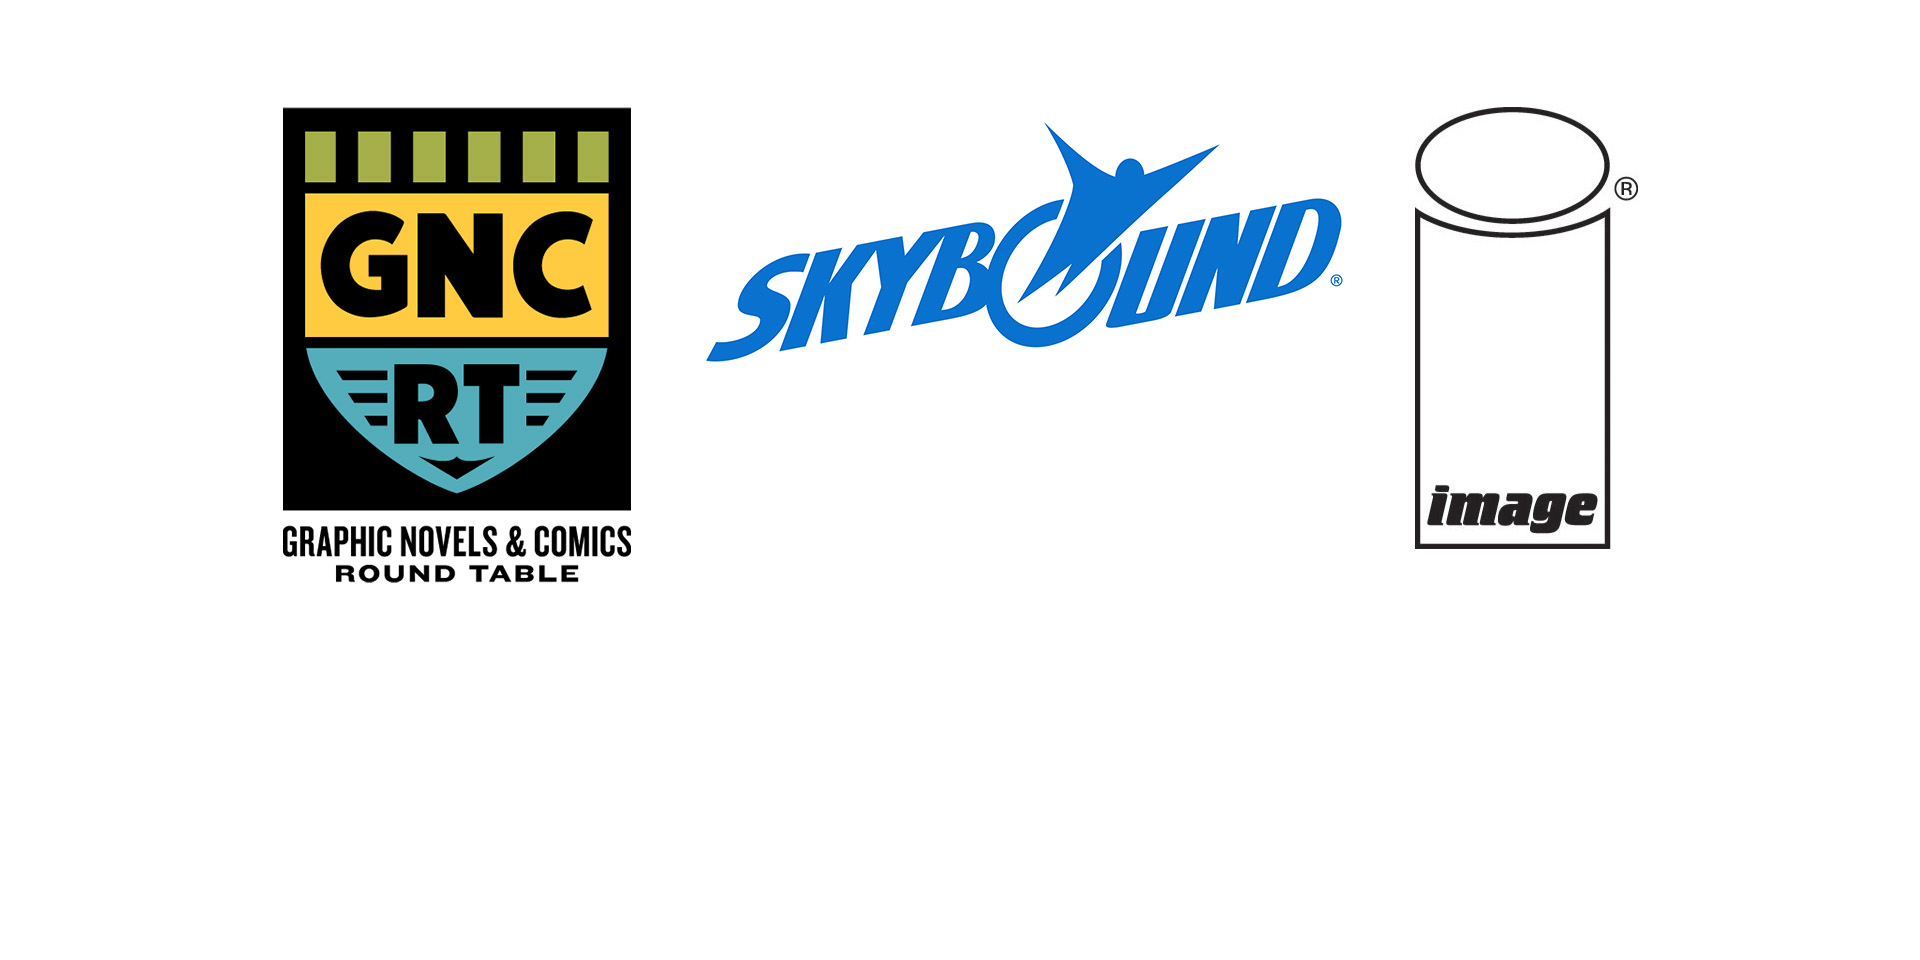 Graphic Novels & Comics Round Table Continues Comics Librarian Conference Travel Grant with funding from Skybound Entertainment